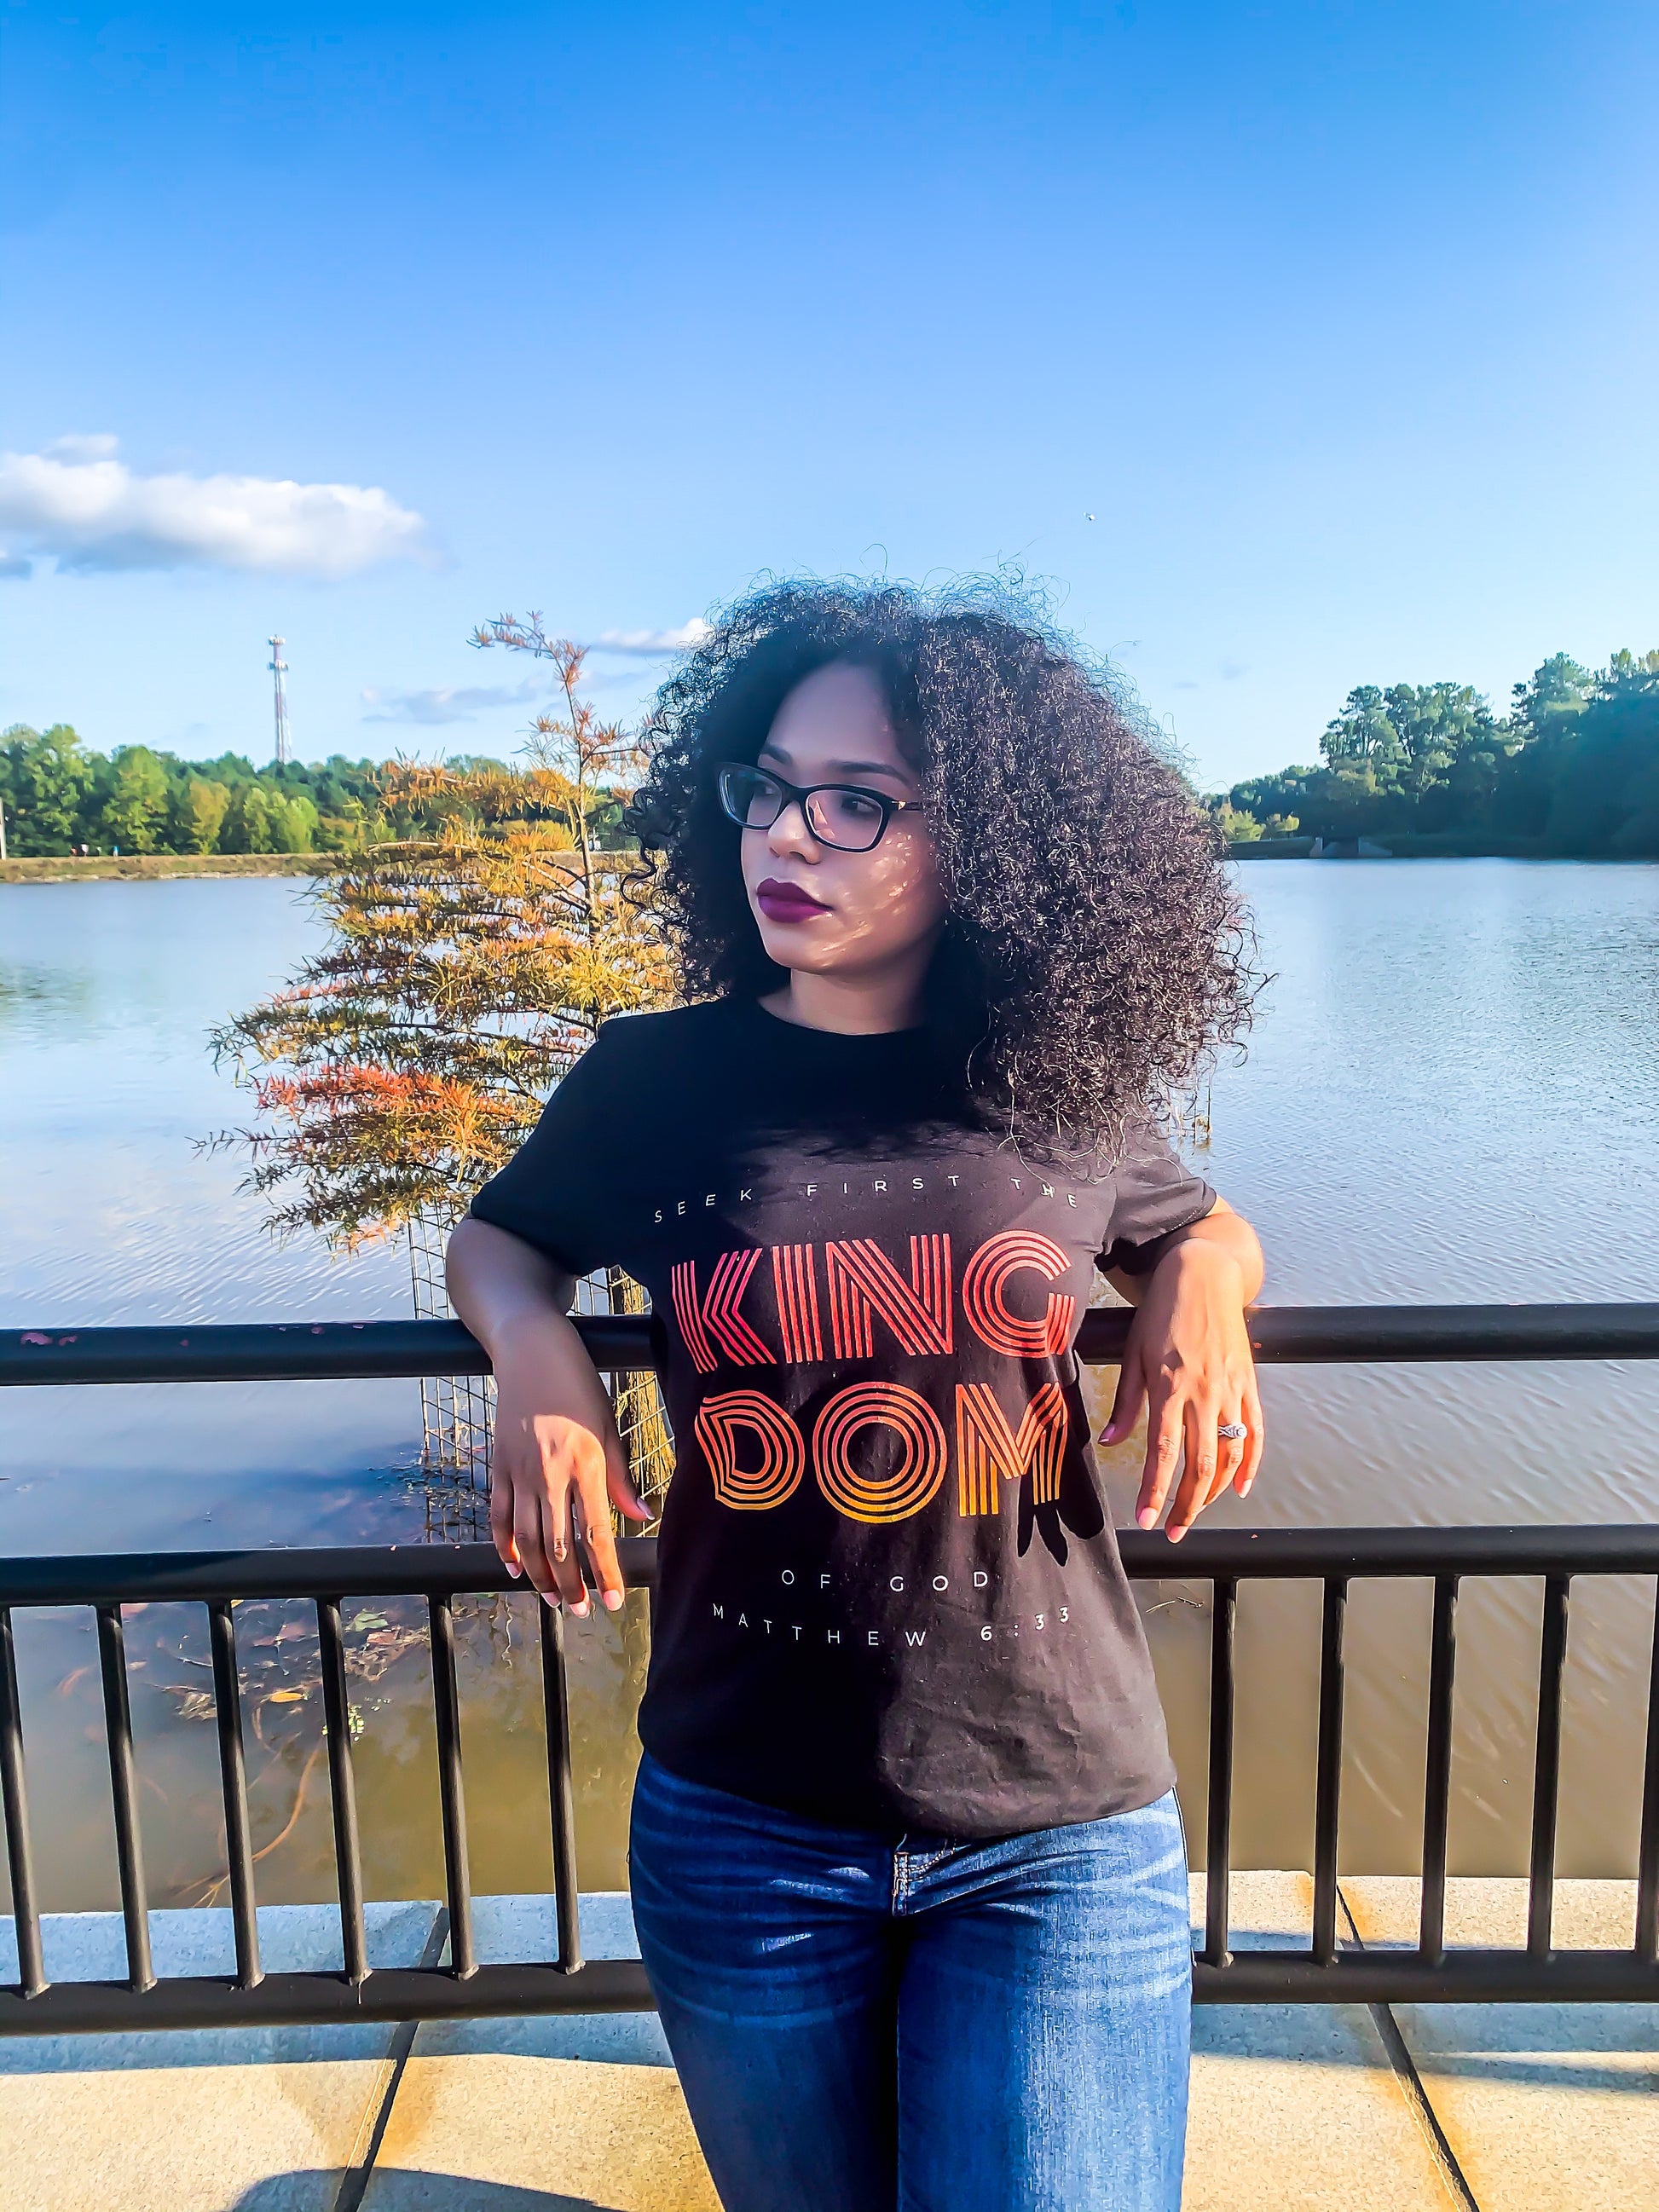 Seek First The Kingdom Short-Sleeve Unisex T-Shirt - DRESS FOR THE KING